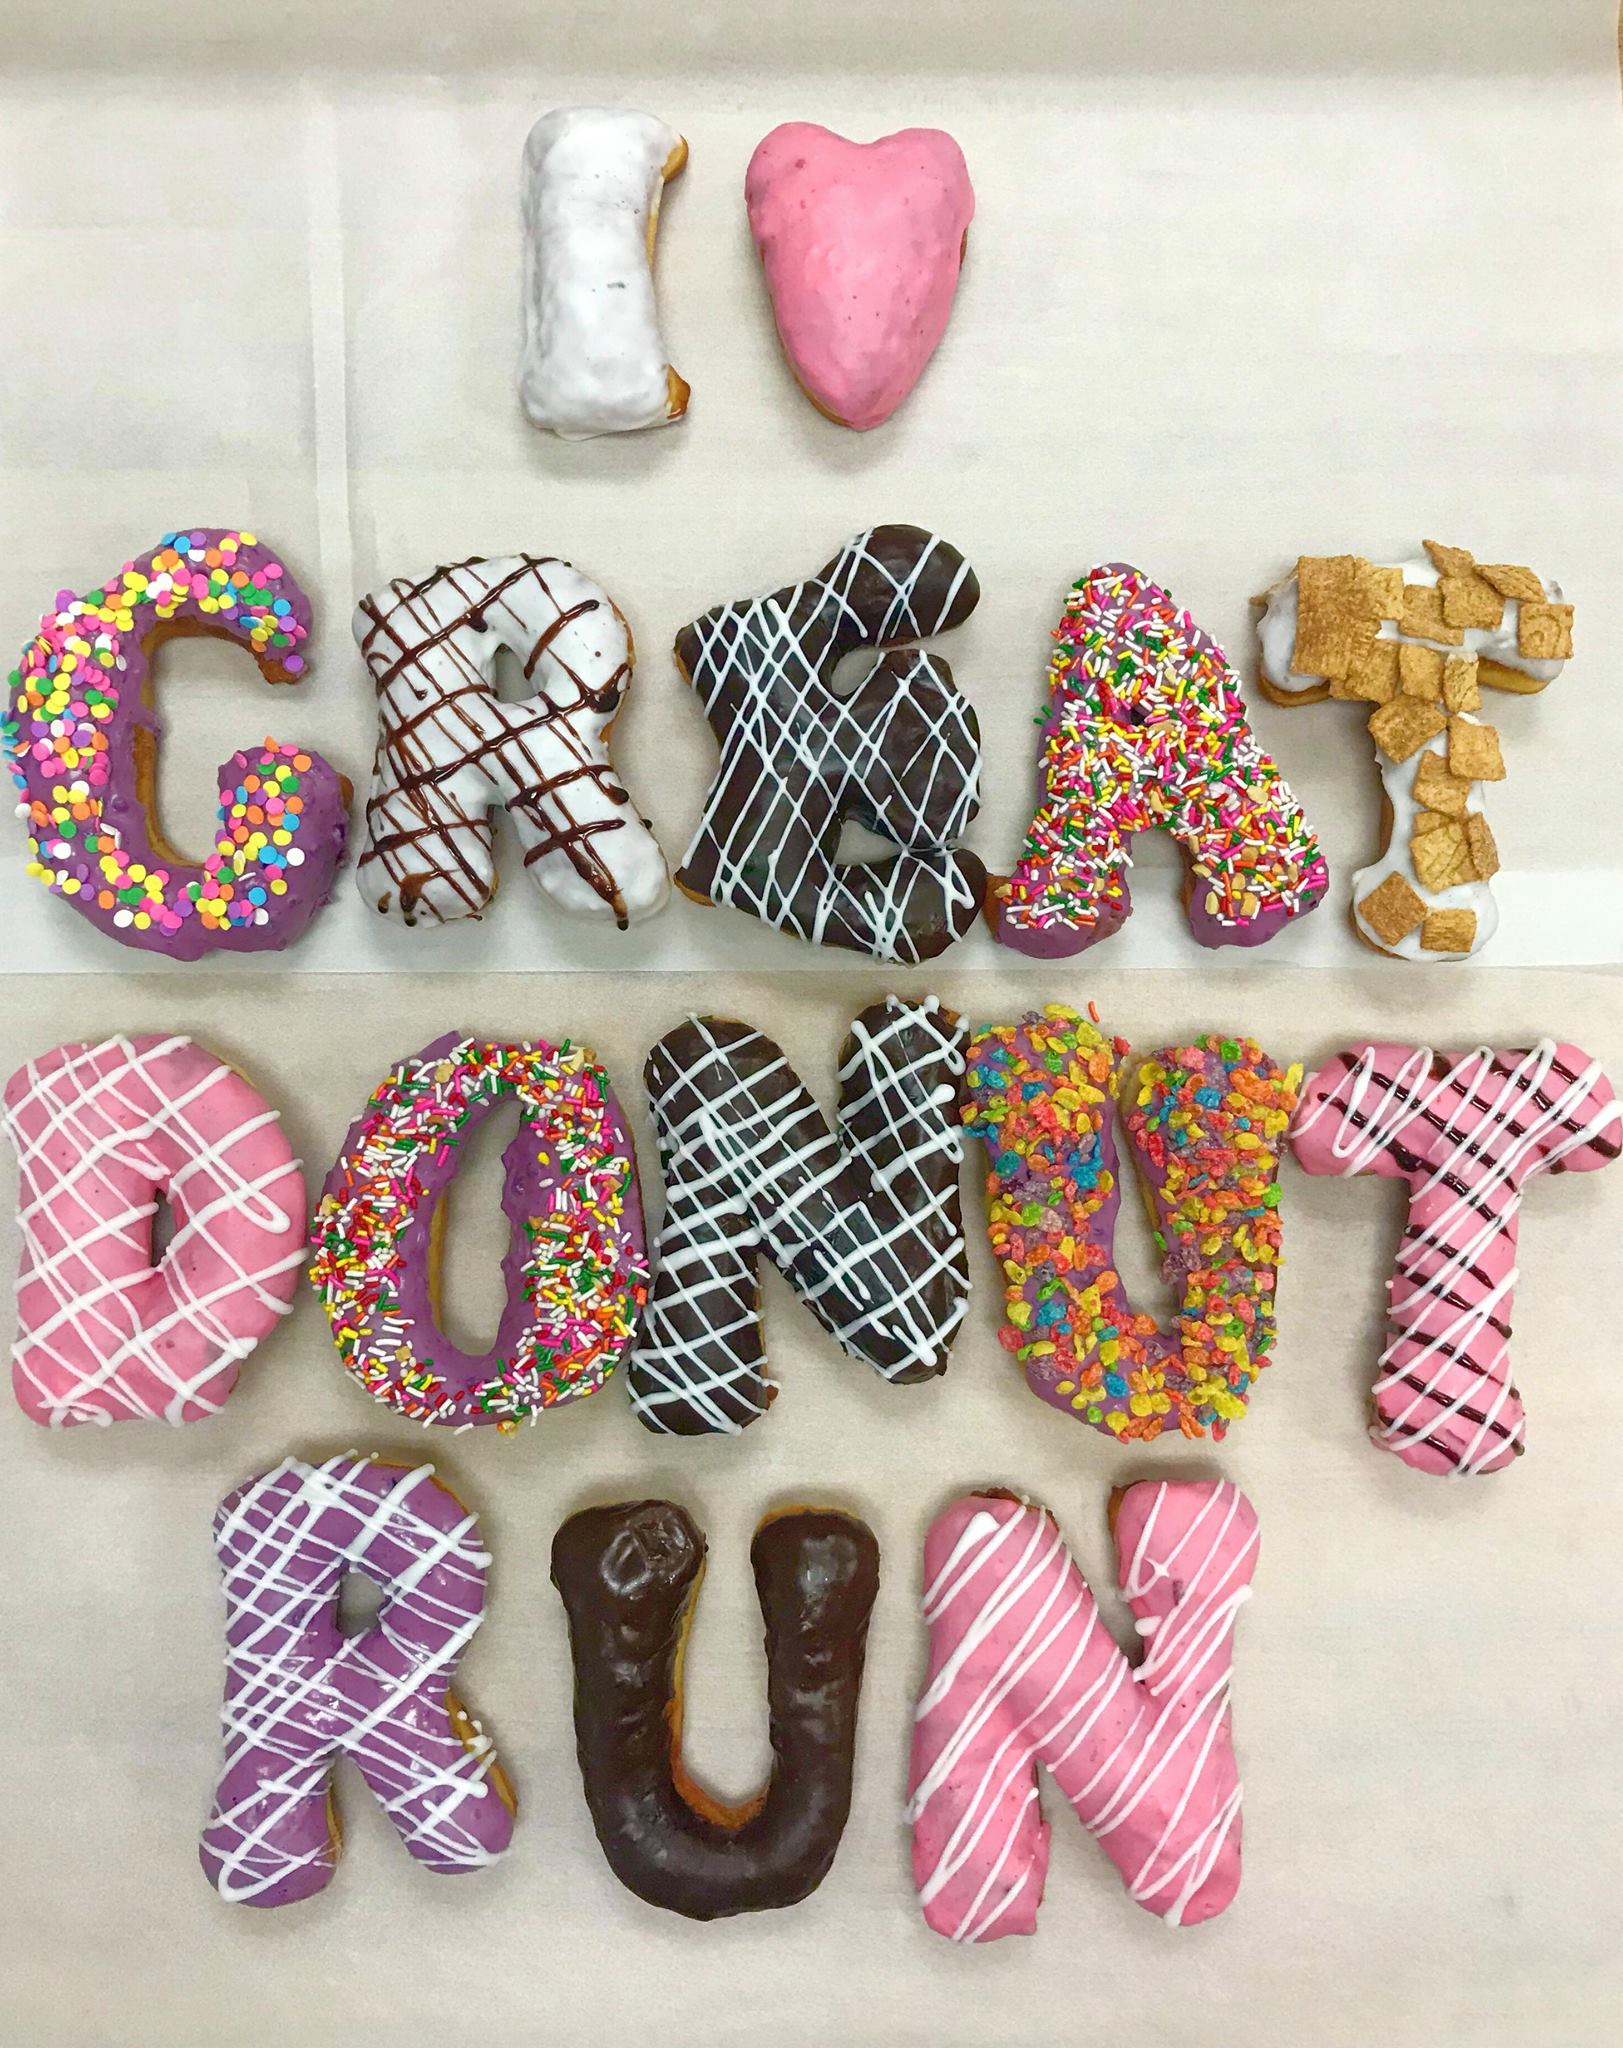 Donut signage from Glee